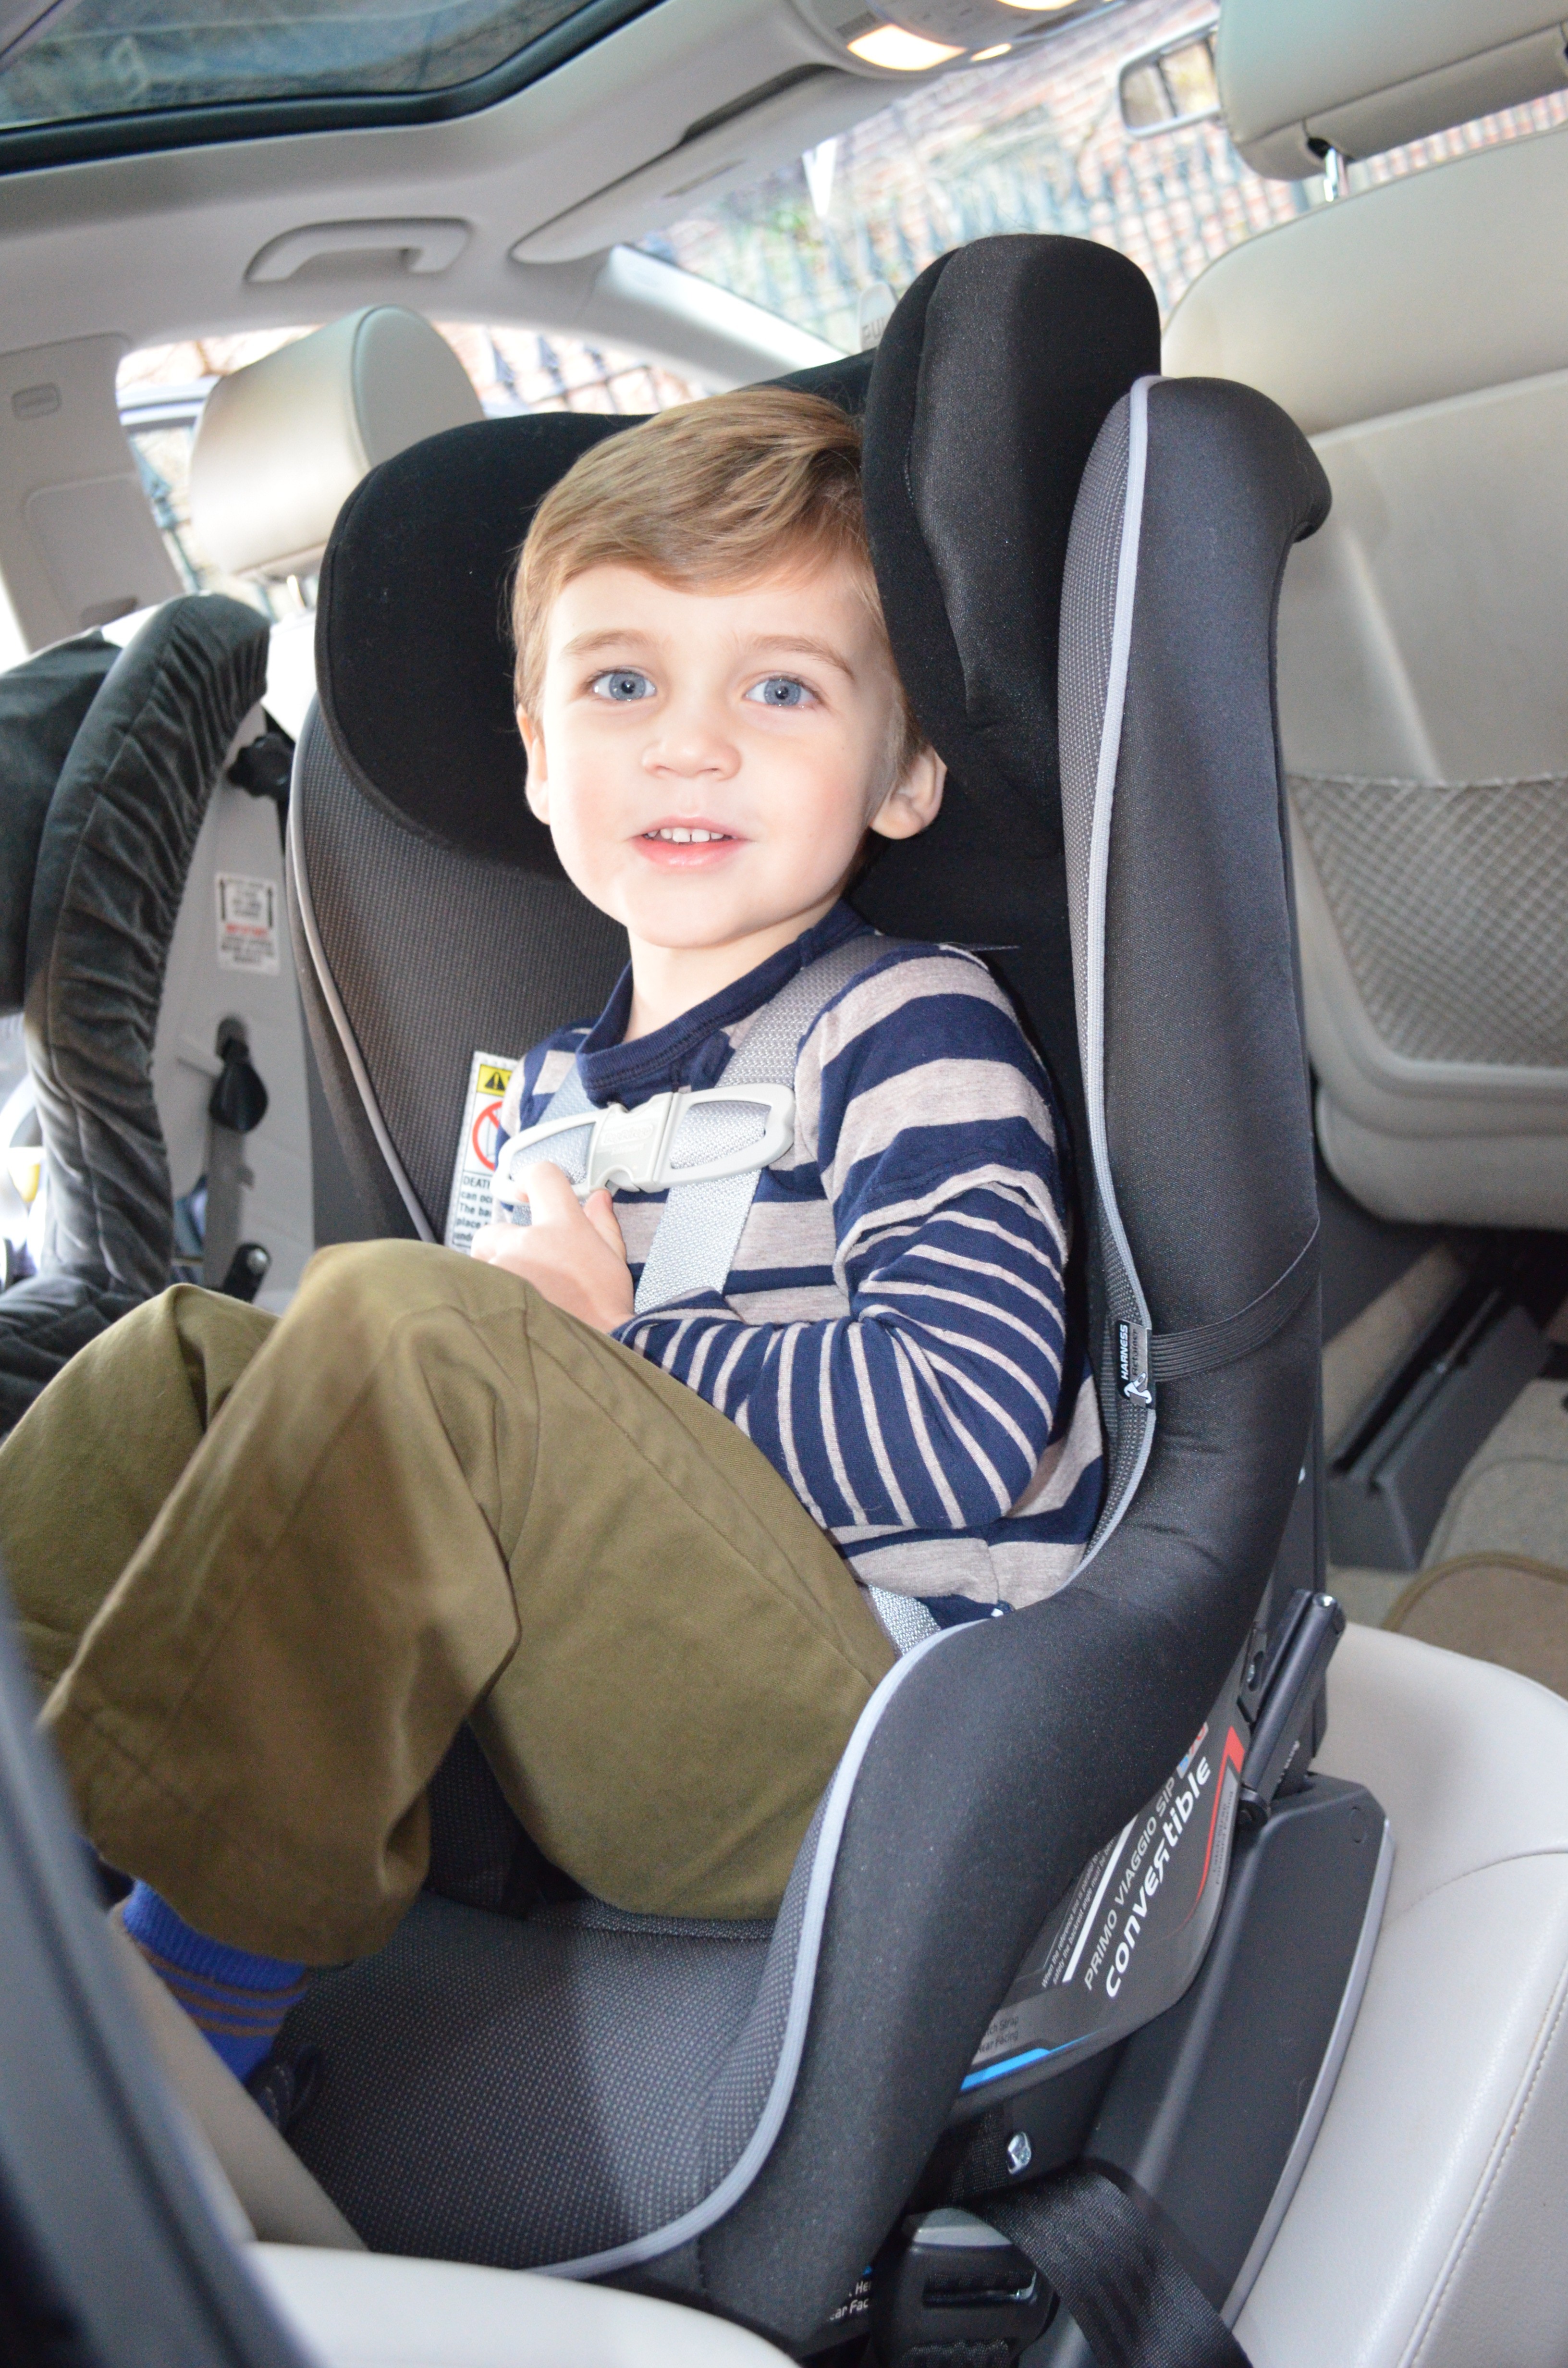 Your Child Turn Forward Facing, At What Age And Weight Can A Child Be In Forward Facing Car Seat